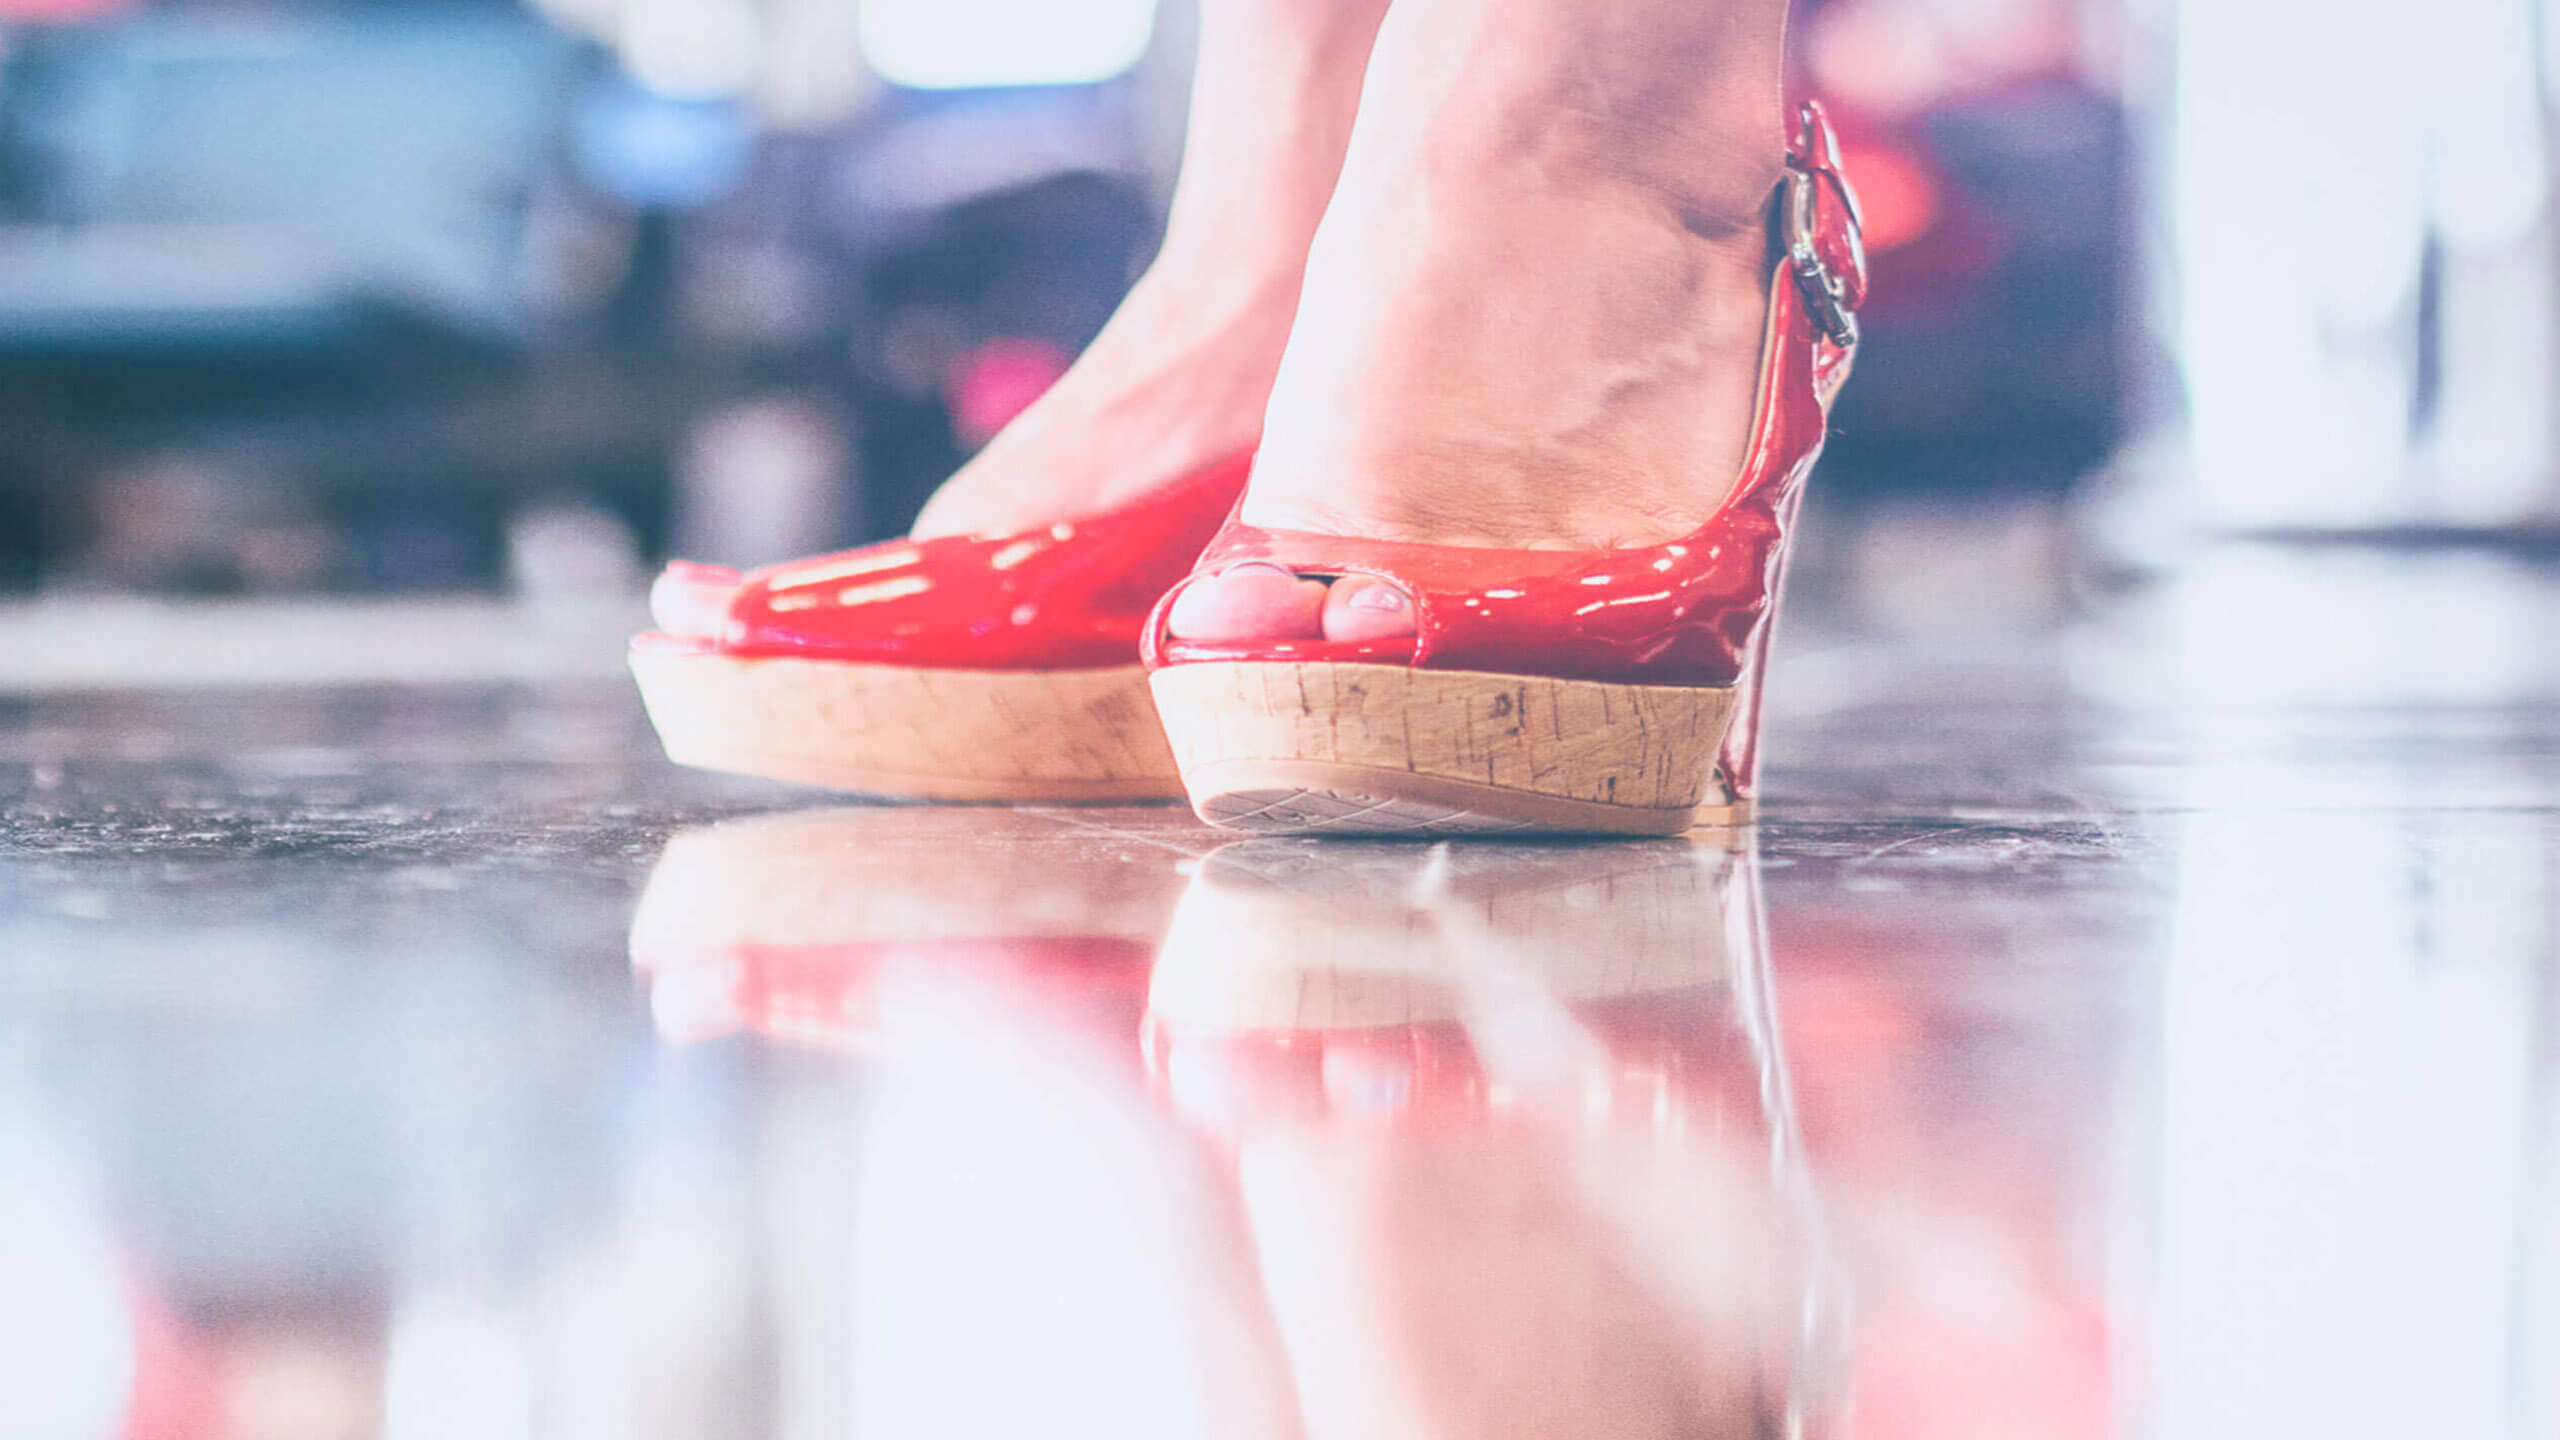 red-shoes-reflection-in-floor-featured-2